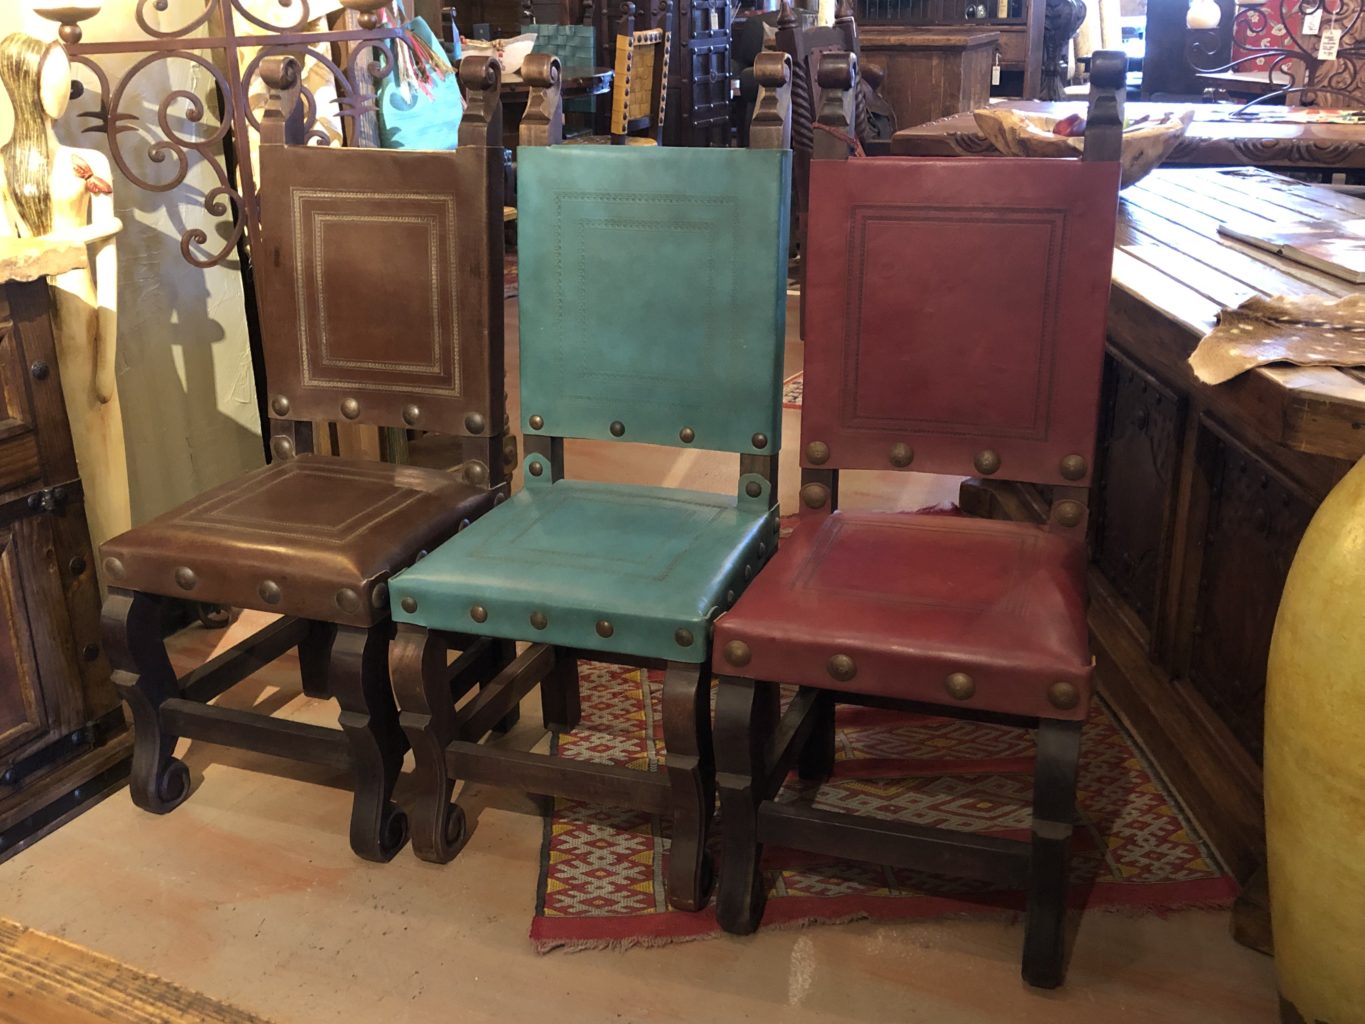 Argentina Tooled Leather Chairs in Café, Turquoise & Red Guinda